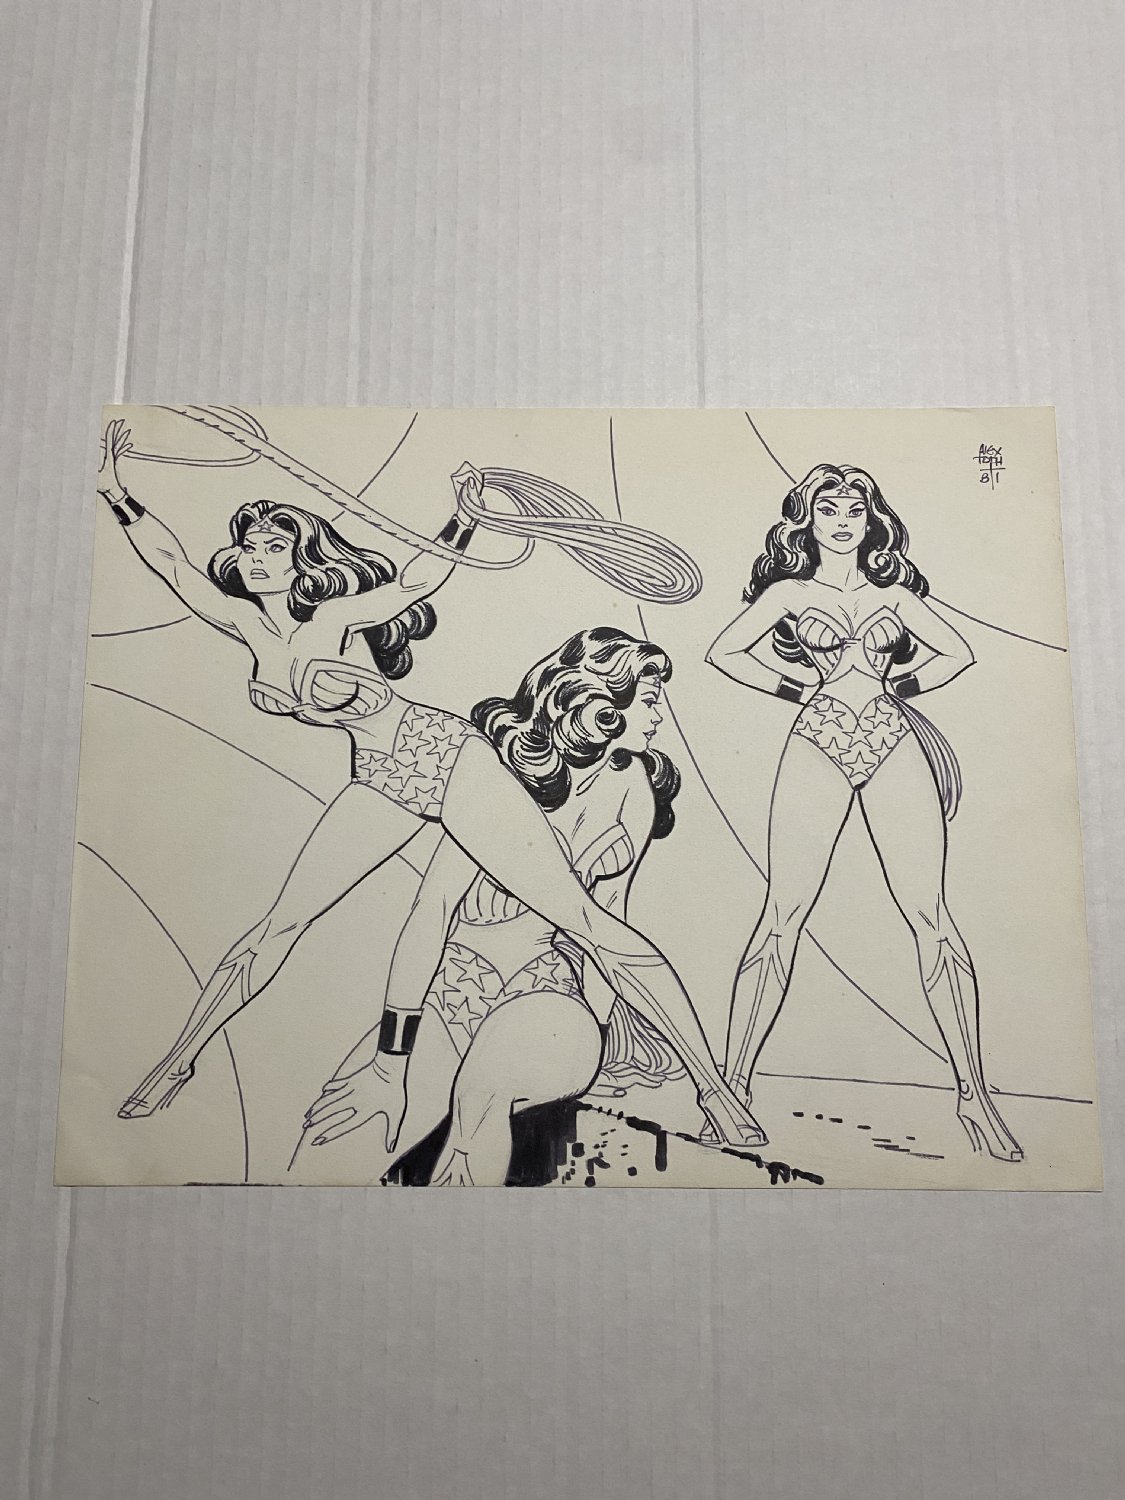 1981 Wonder Woman Concept Art for Underoos by Alex Toth with Scott